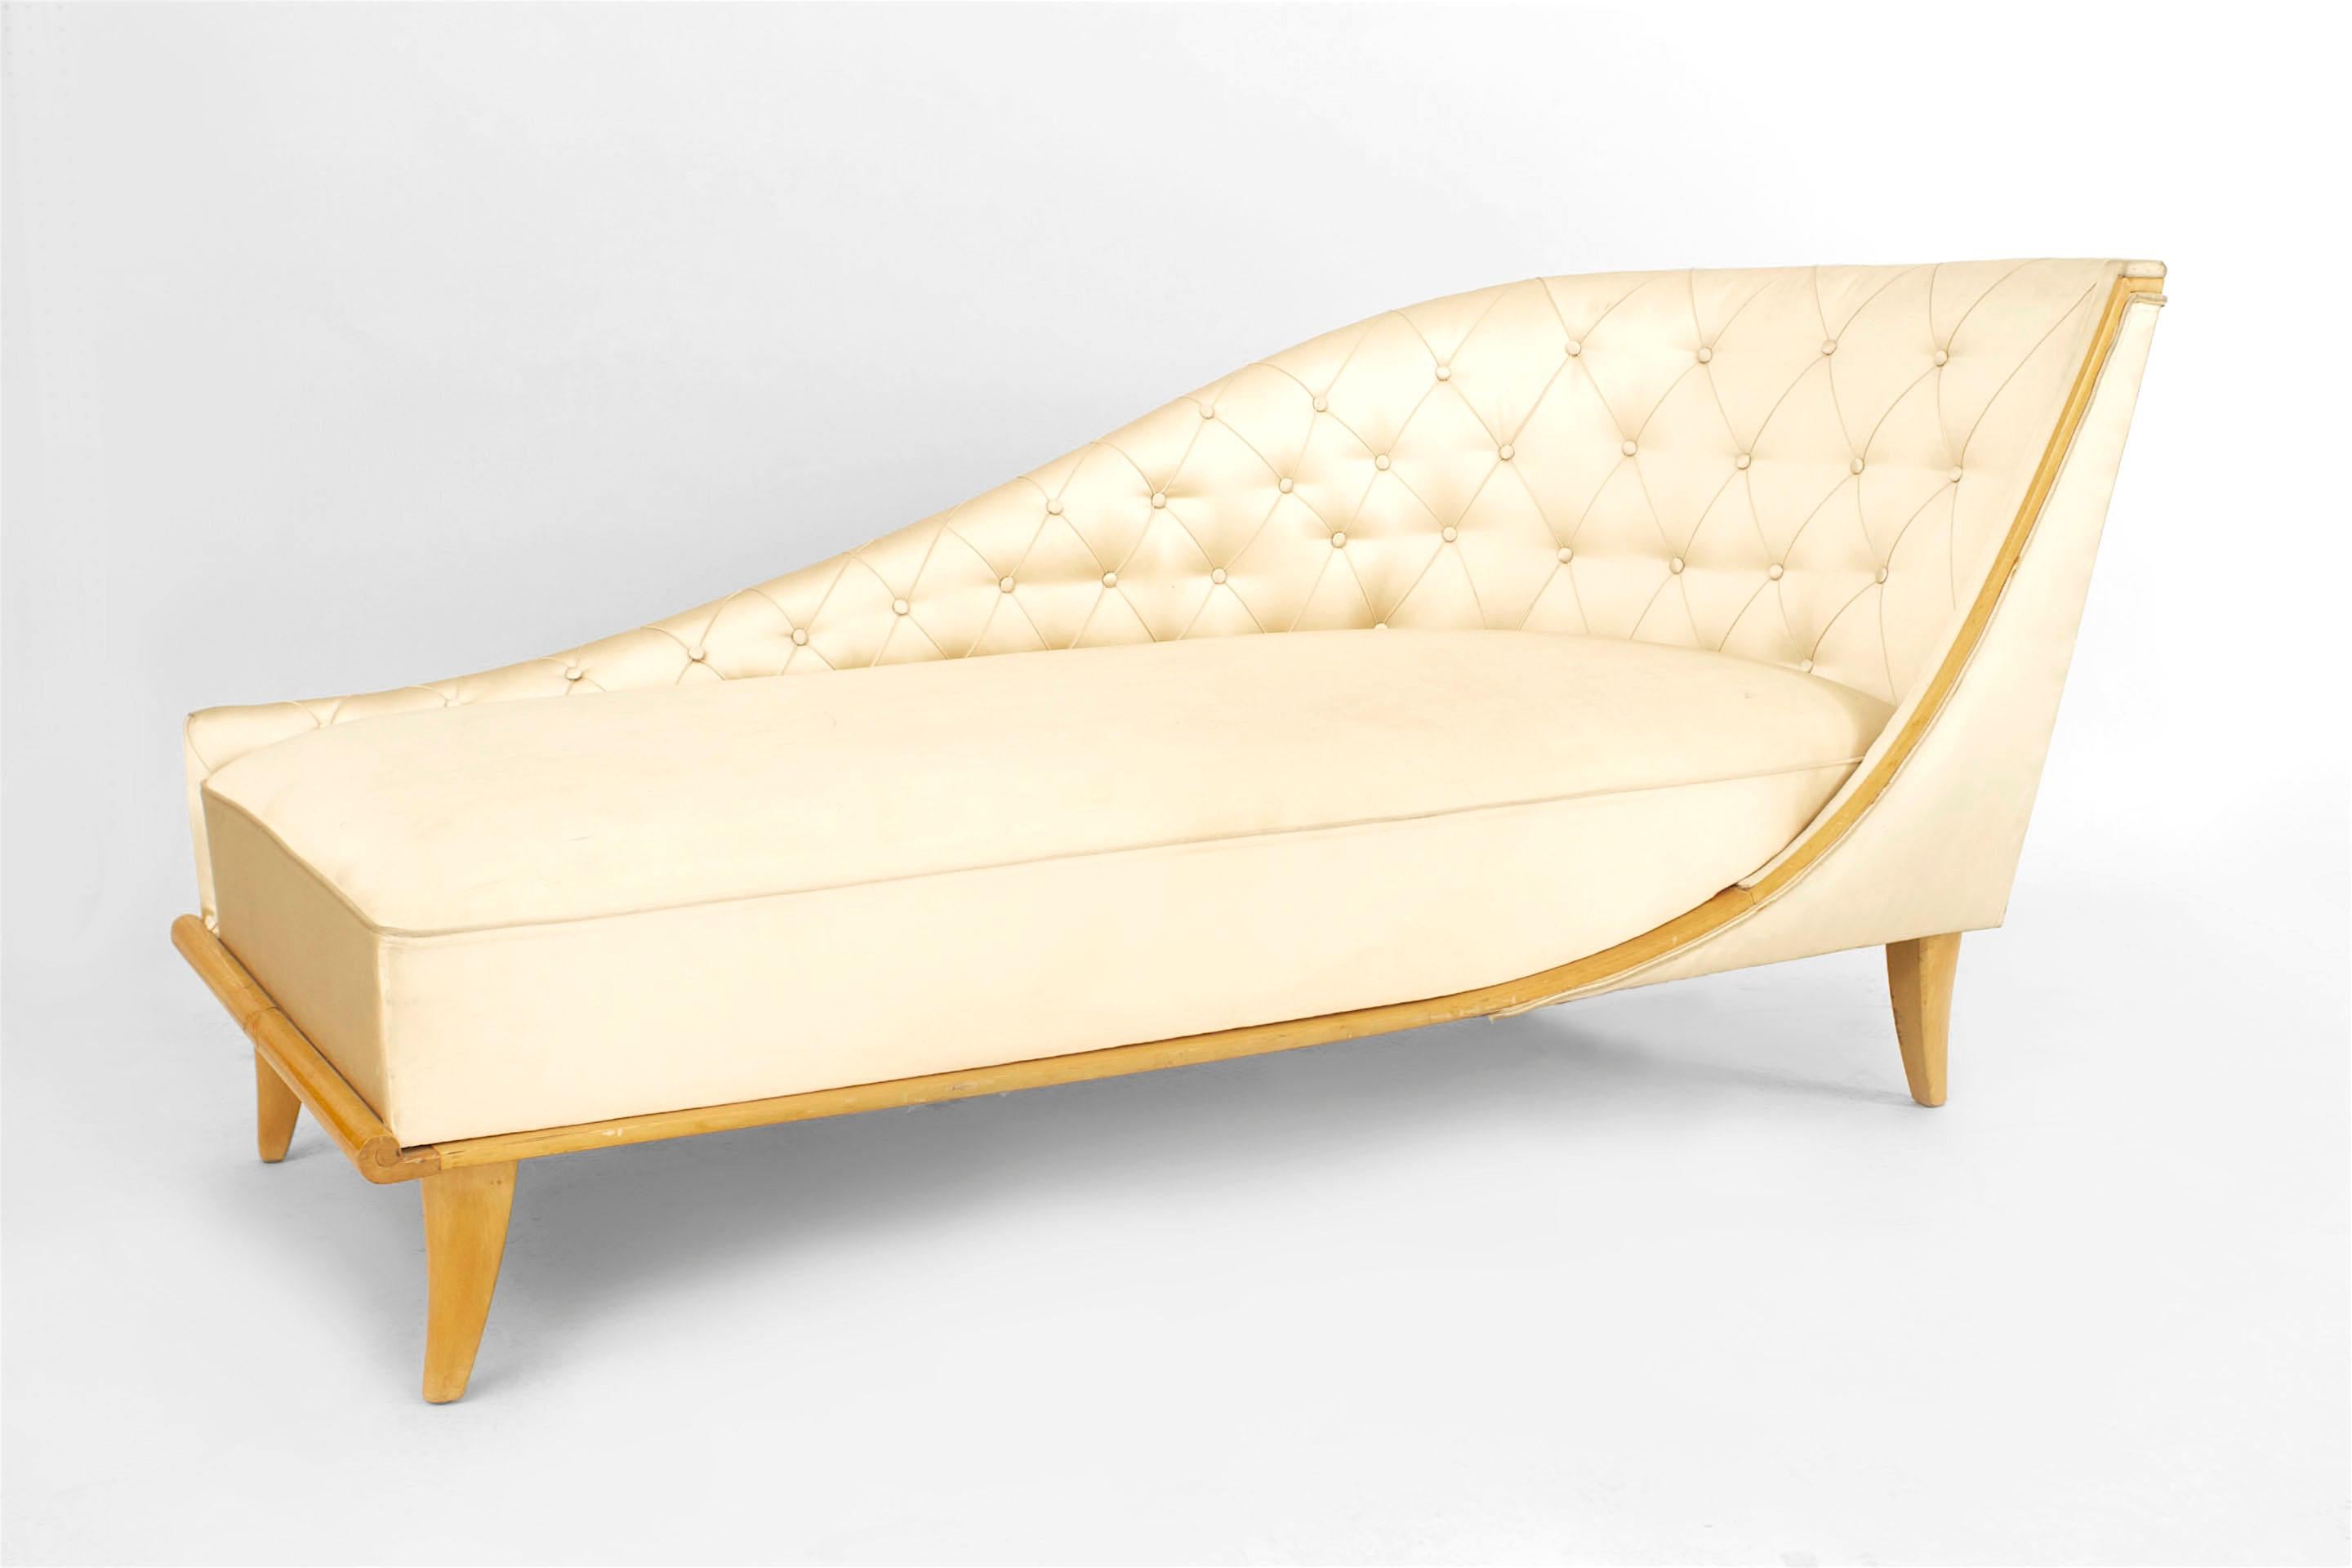 French Mid-Century (1940s) sycamore chaise lounge with champagne satin upholstery and tufted shaped side and back (p. 90 